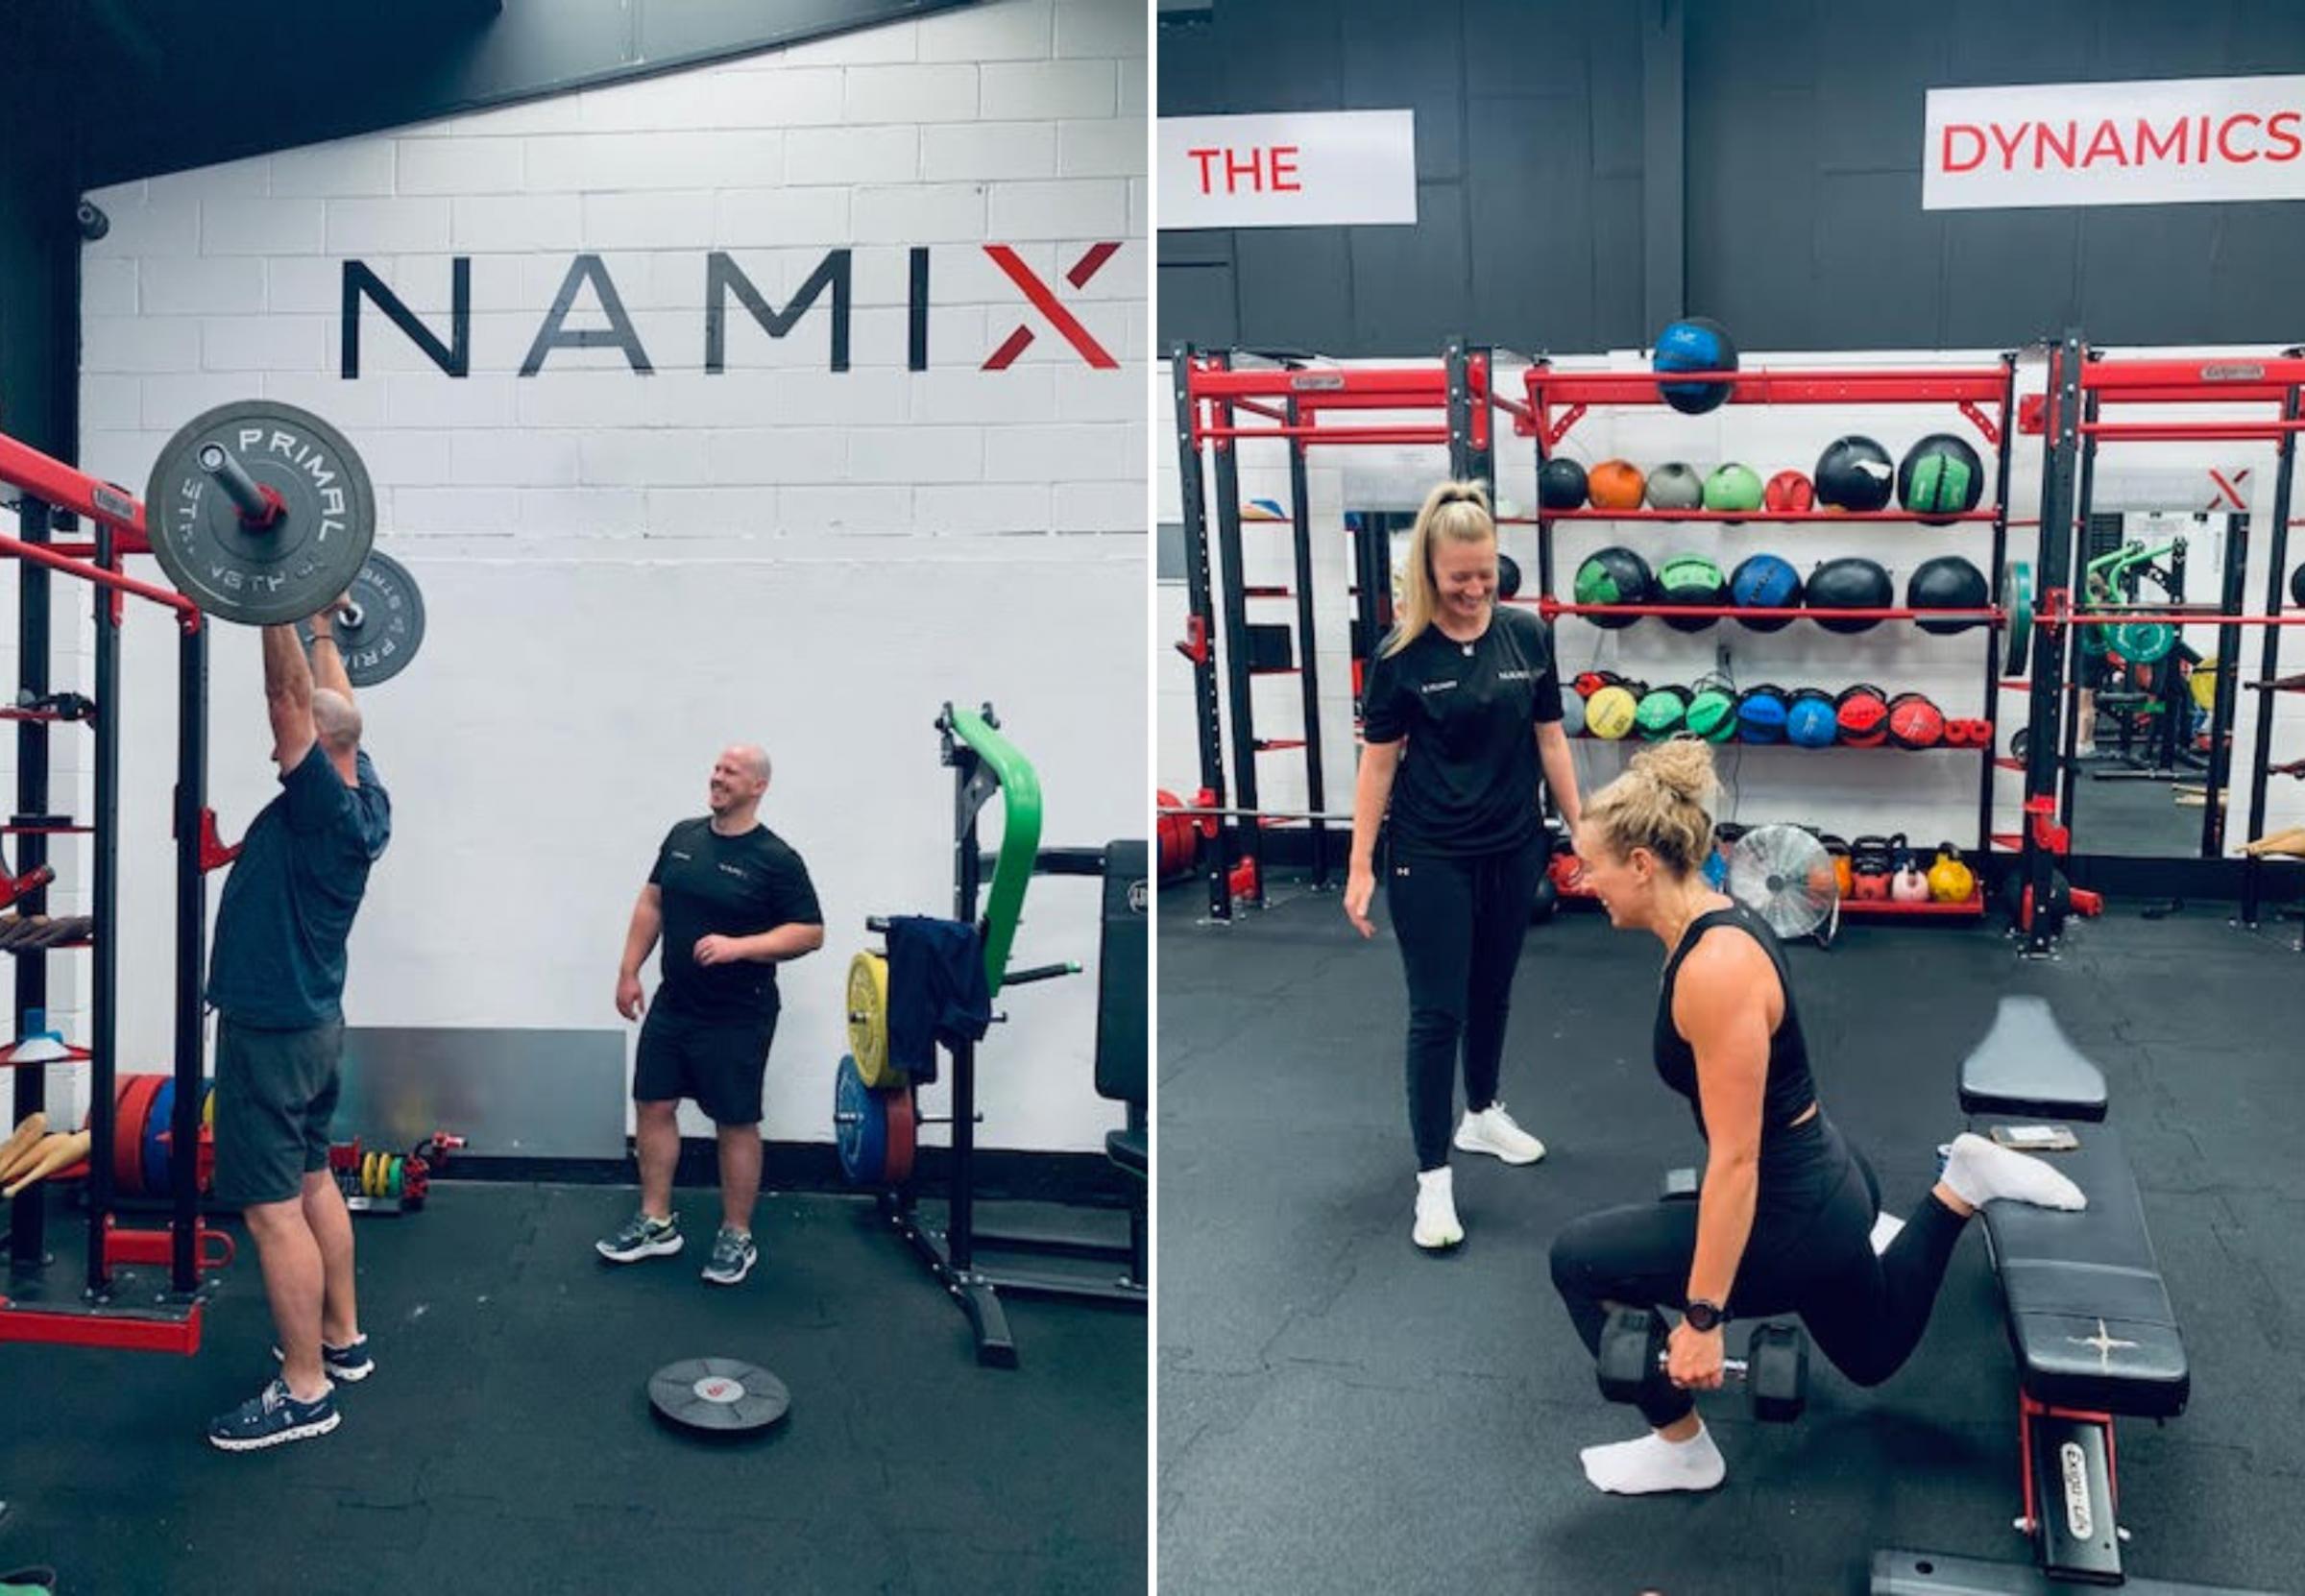 One-to-one personal training and injury rehab sessions at Namix